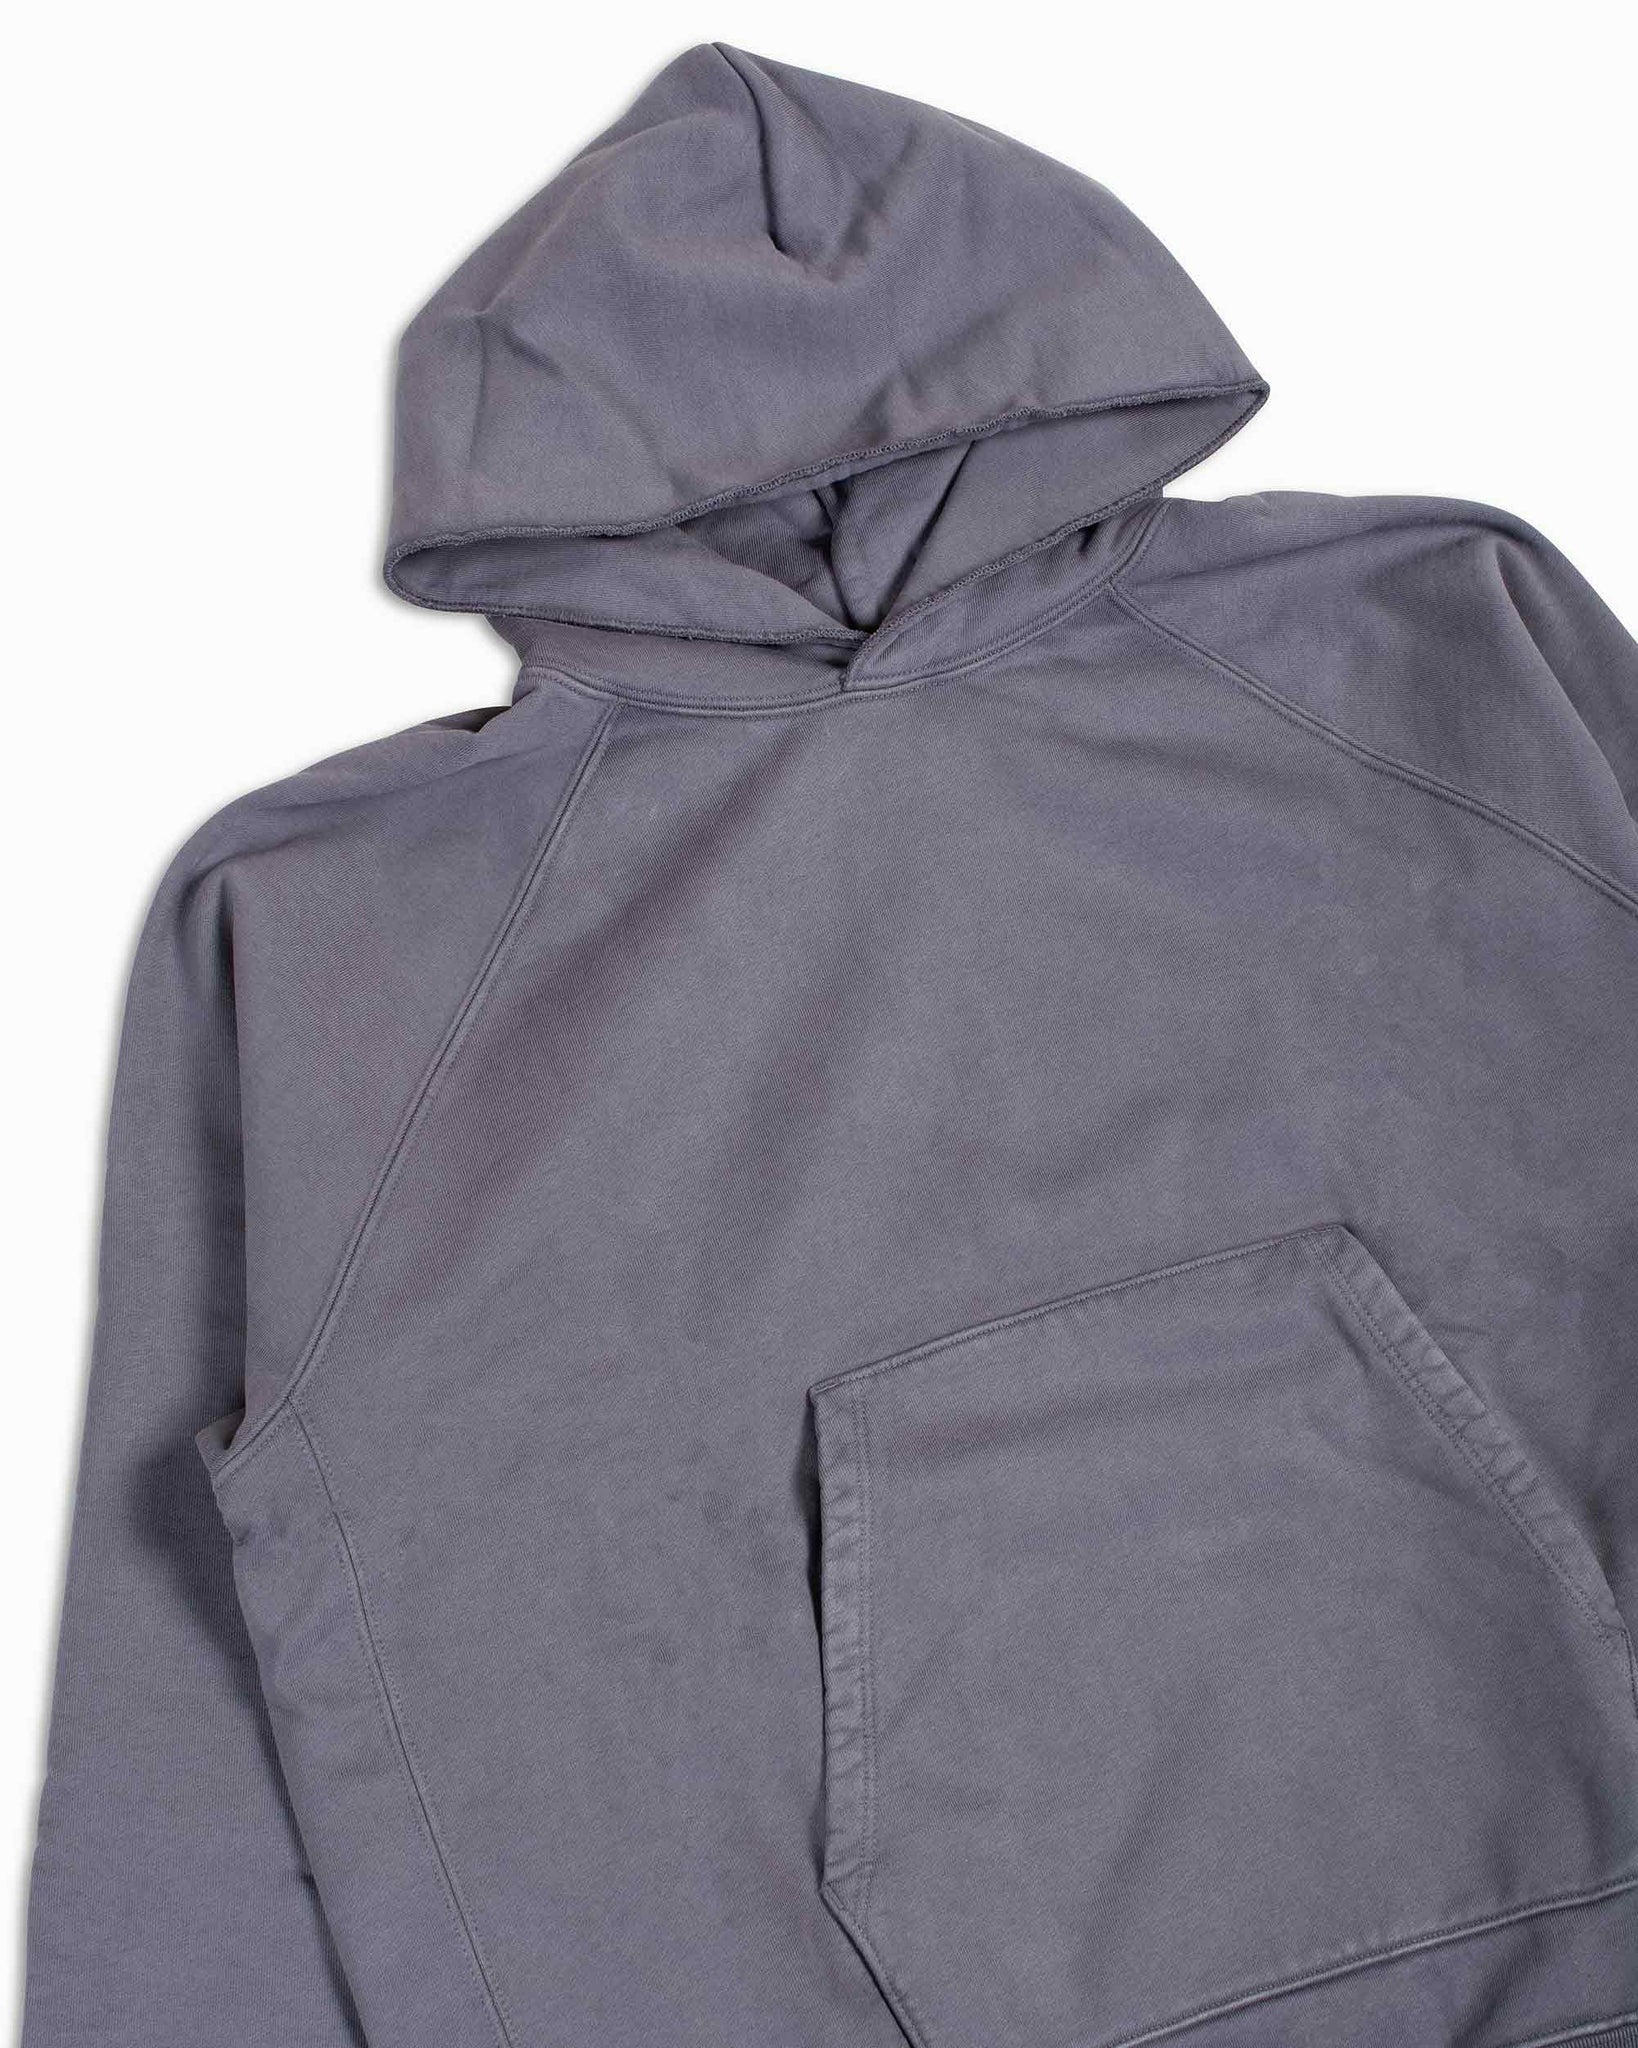 Lady White Co. Super Weighted Hoodie Purple Slate Details